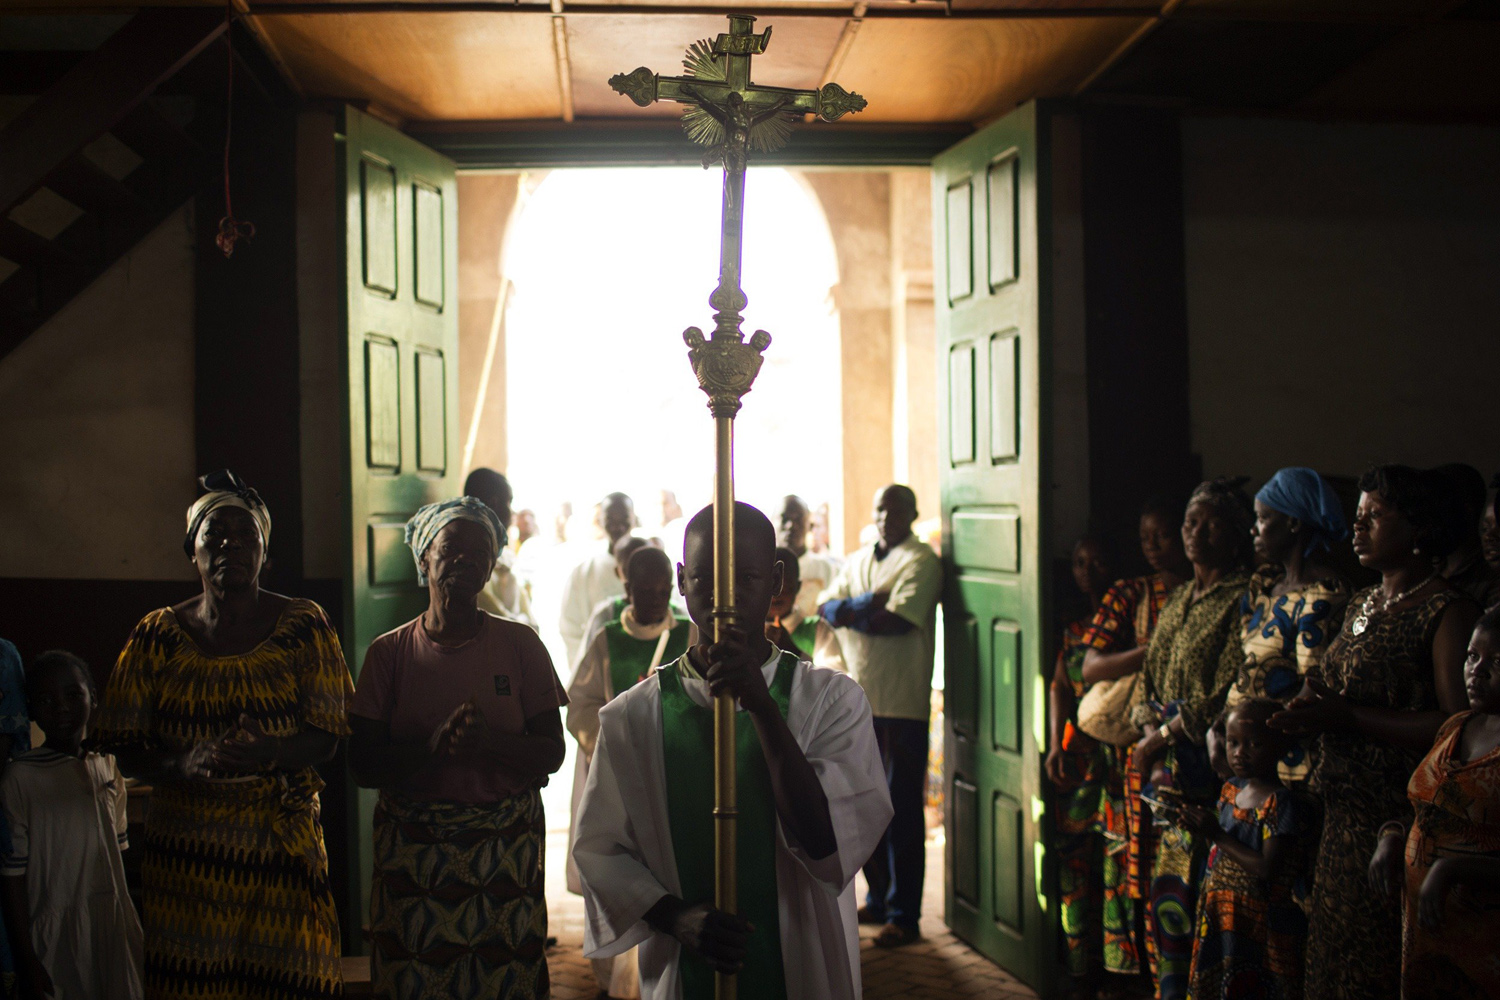 A boy carries a cross at the beginning of Sunday mass in a church in Wango